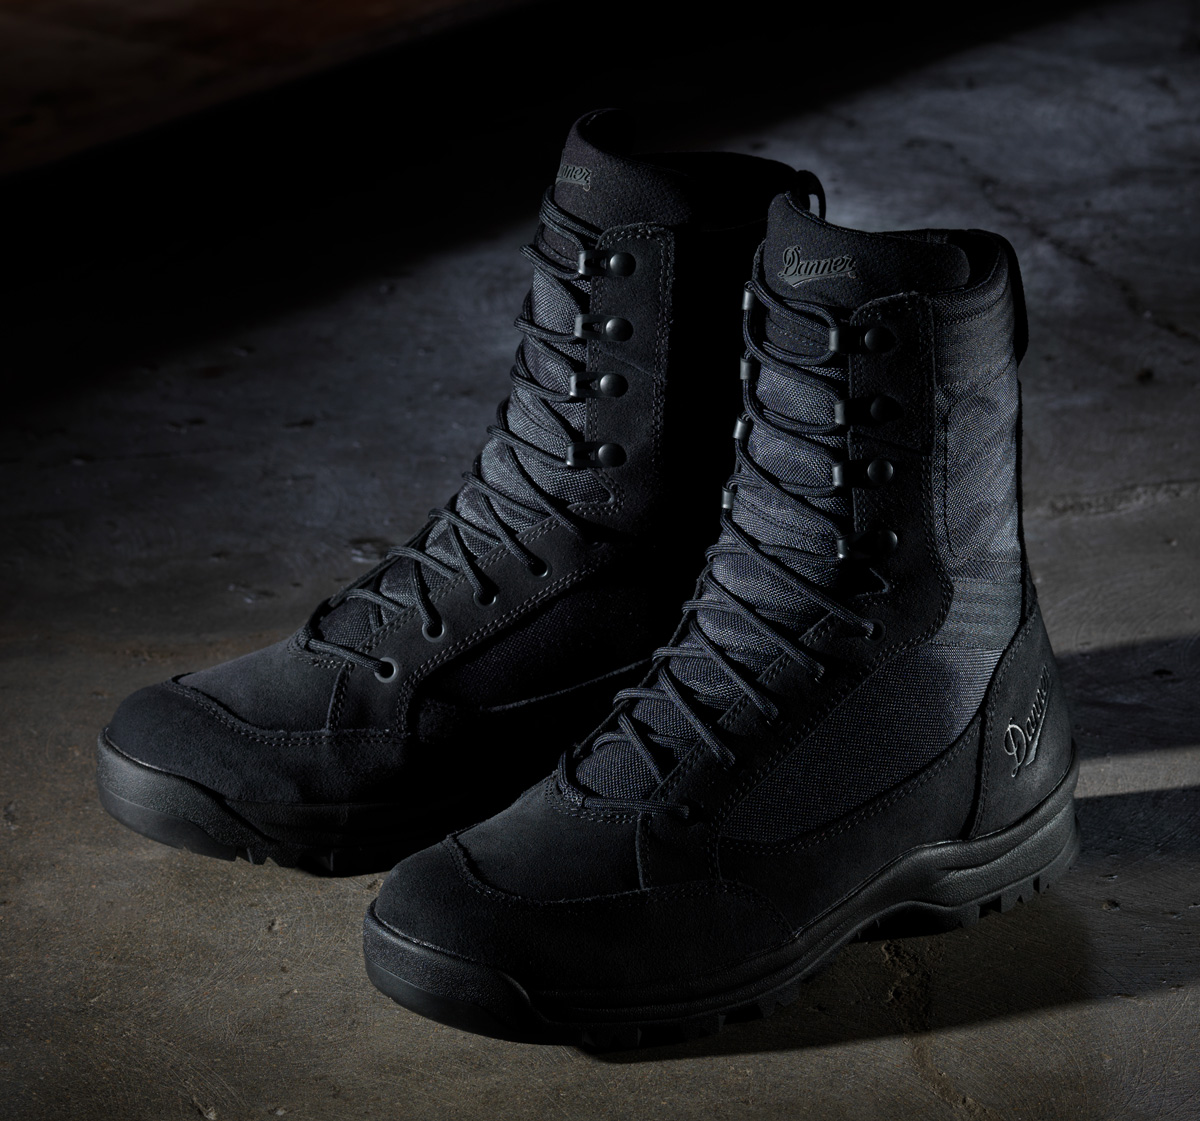 Danner releases Limited Edition 007 Tanicus Boots as worn by James Bond ...